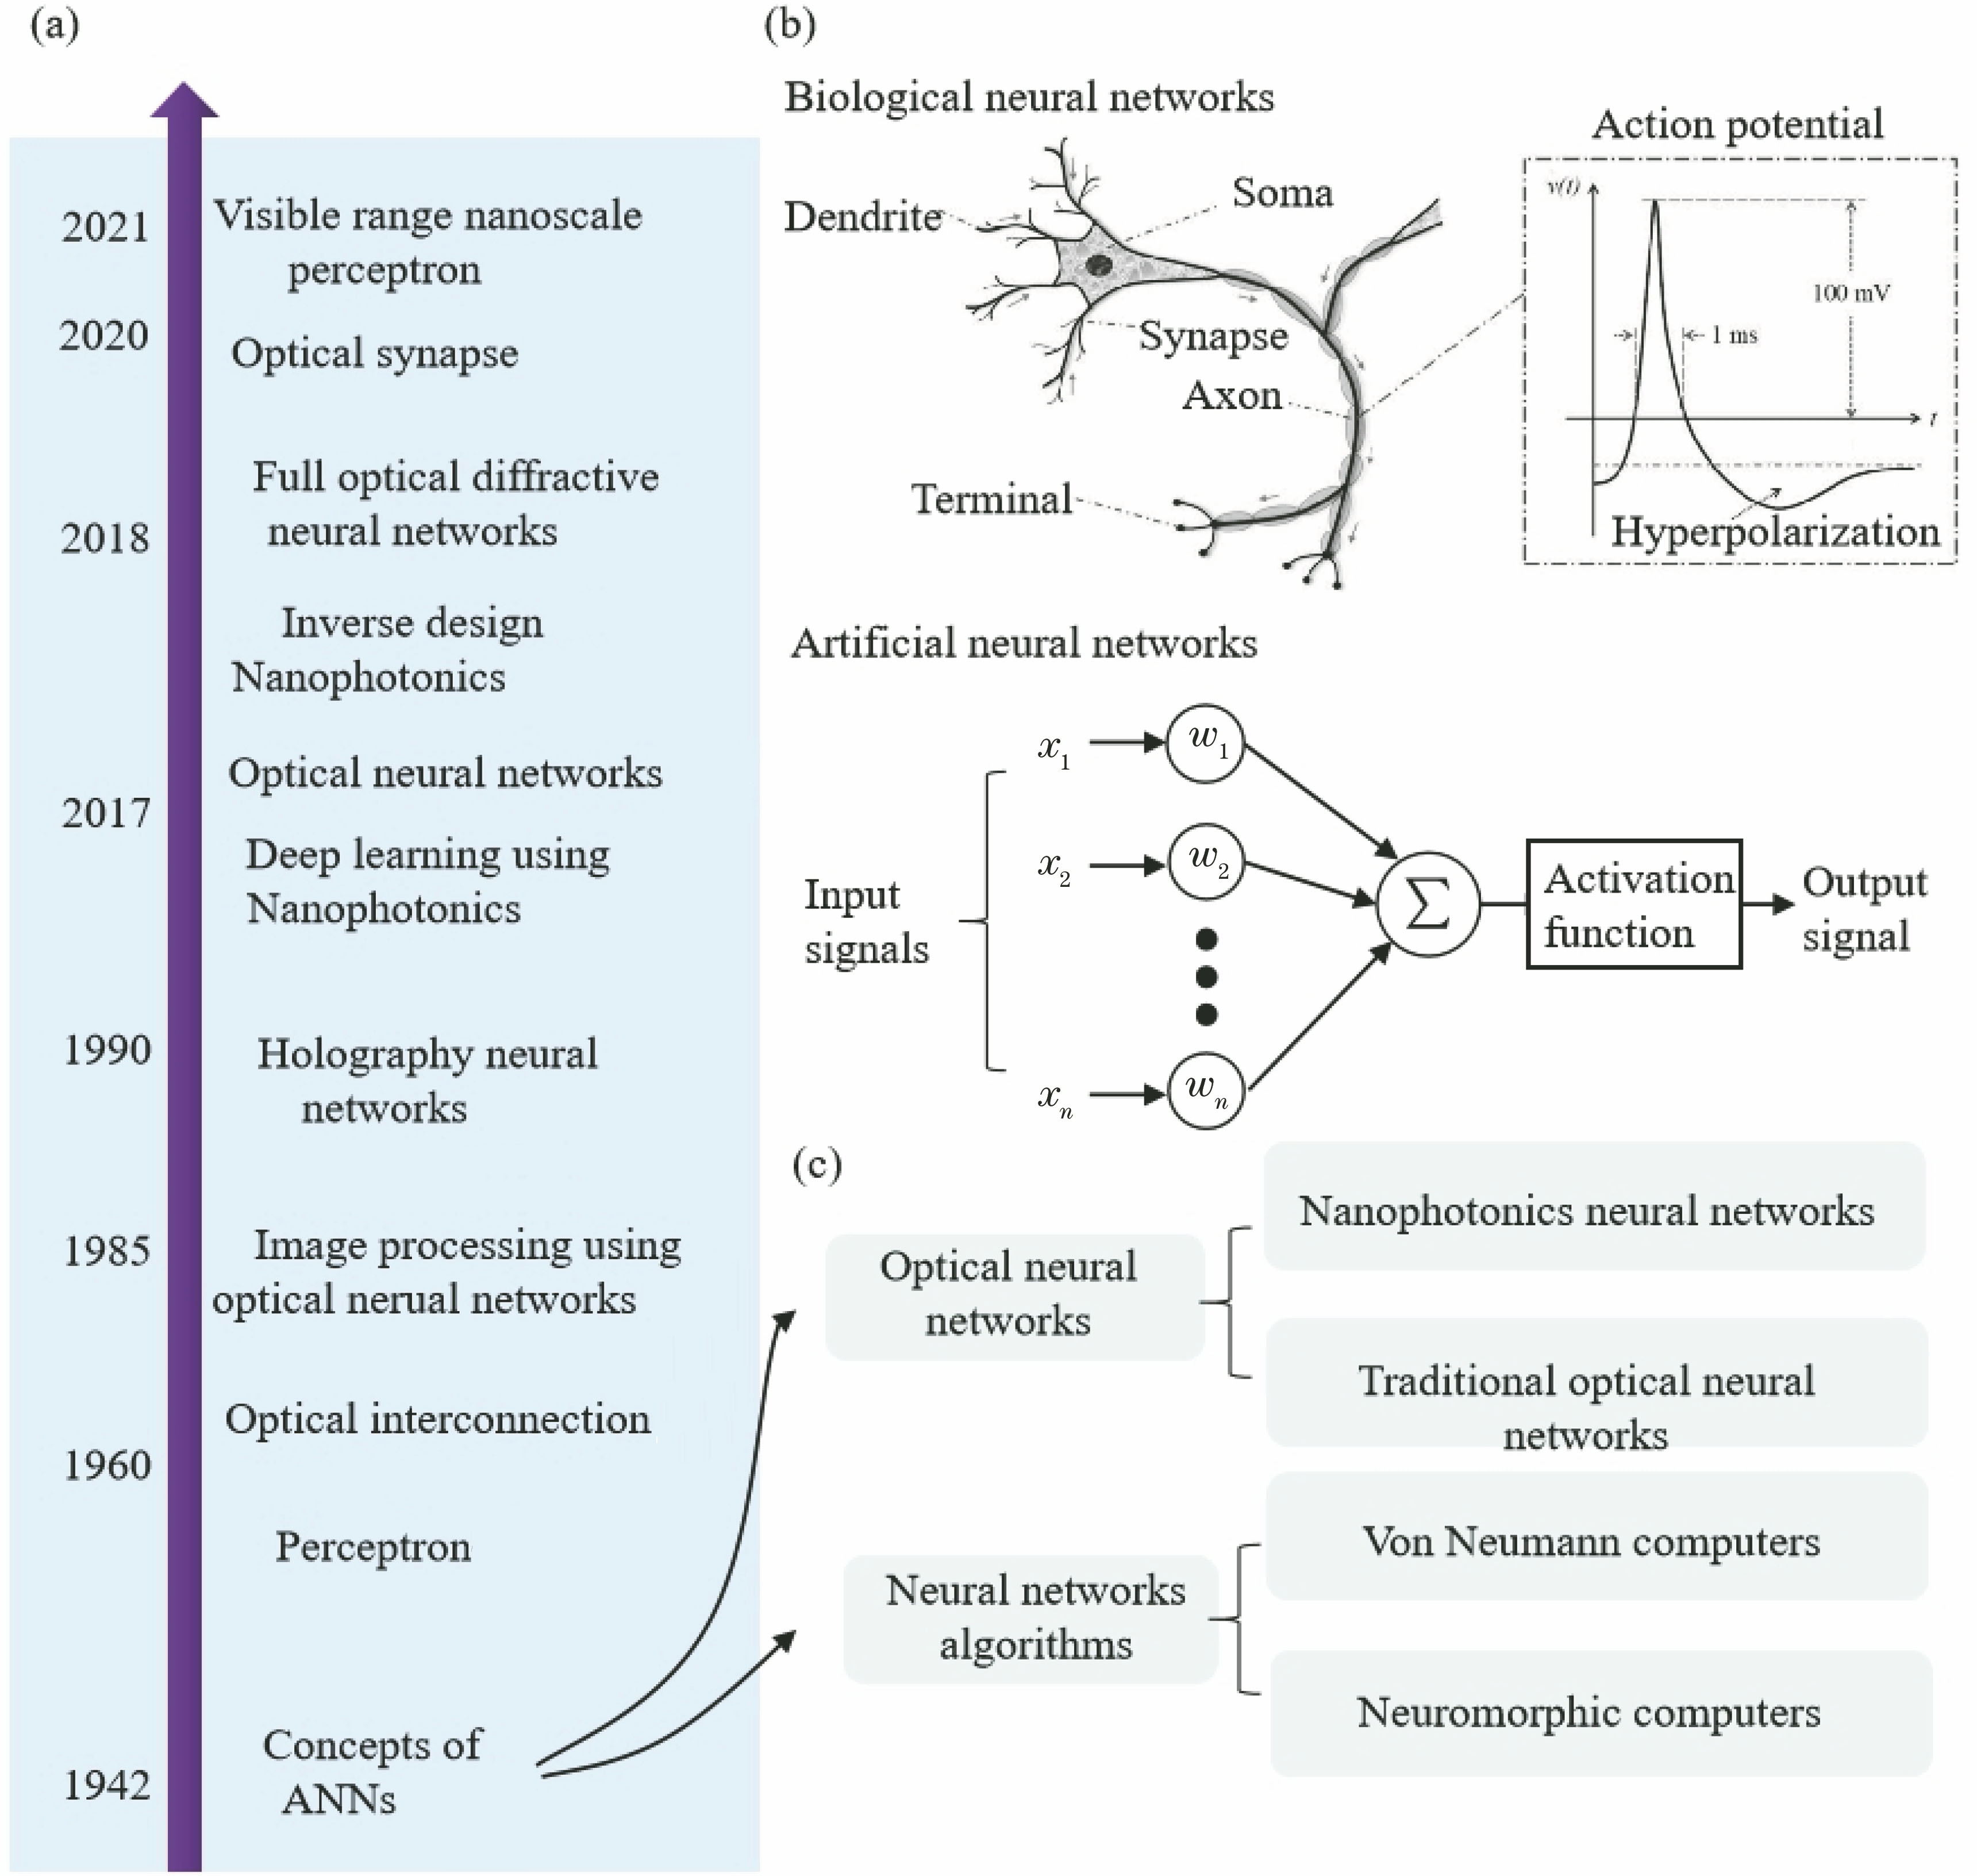 Concepts of artificial neural networks, and development timeline of optical neural networks. (a) Development timeline of optical neural networks; (b) features of structures and signals of biological neural networks[18] and basic principle of artificial neural networks (x1, x2, and x3 represent input signals, and w1,w2, and wn represent calculation weights); (c) general categories of artificial neural networks